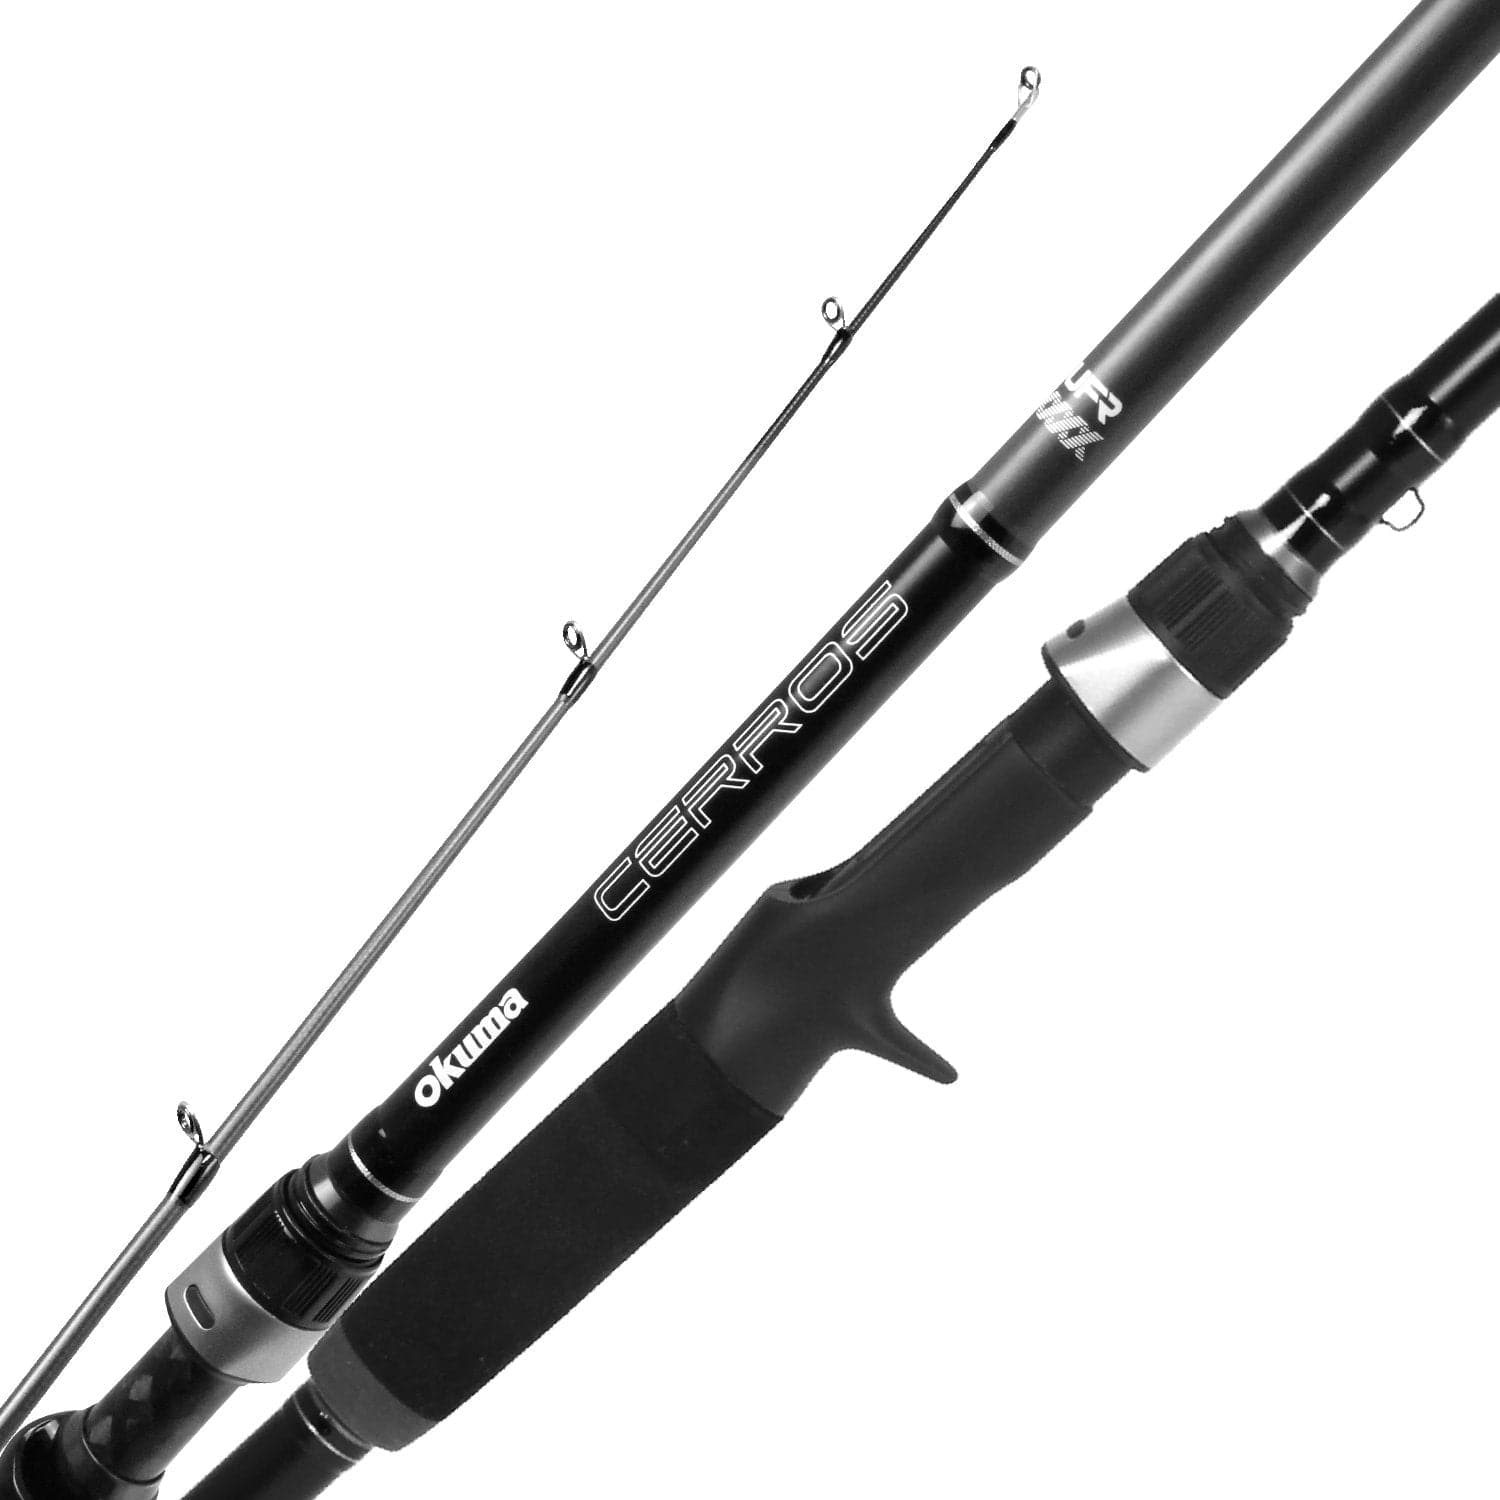 Casting Rods - Fishing Rods